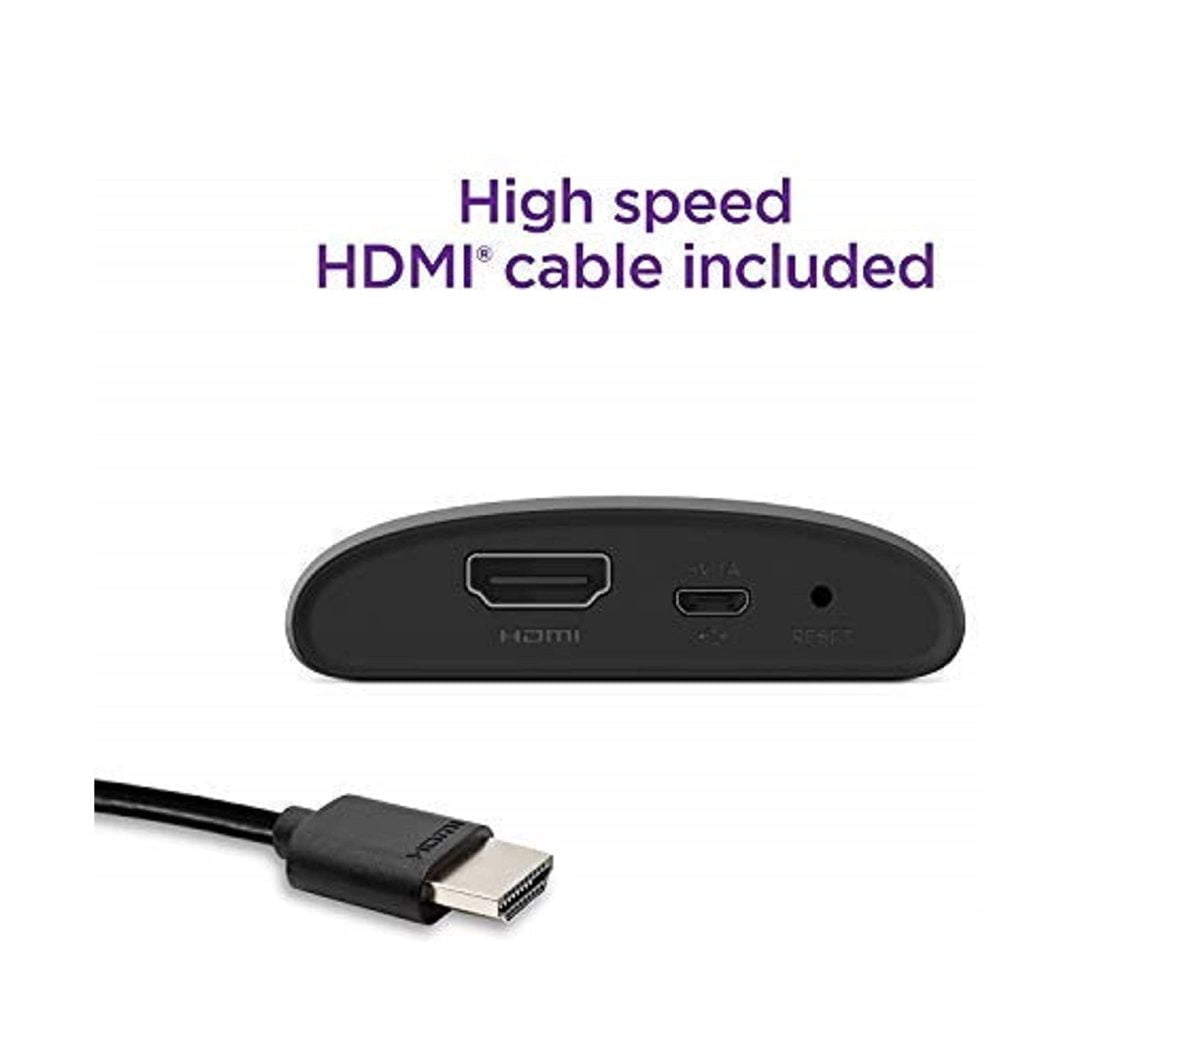 71Ja8Eeatdl. Ac Sl1500 Roku &Lt;H1&Gt;Roku Express | Hd Streaming Media Player With High Speed Hdmi Cable And Simple Remote&Lt;/H1&Gt; &Lt;Ul Class=&Quot;A-Unordered-List A-Vertical A-Spacing-Mini&Quot;&Gt; &Lt;Li&Gt;&Lt;Span Class=&Quot;A-List-Item&Quot;&Gt; Streaming Made Easy: Roku Express Lets You Stream Free, Live And Premium Tv Over The Internet Right To Your Tv; It’s Perfect For New Users, Secondary Tvs And Easy Gifting But Powerful Enough For Seasoned Pros &Lt;/Span&Gt;&Lt;/Li&Gt; &Lt;Li&Gt;&Lt;Span Class=&Quot;A-List-Item&Quot;&Gt; Quick And Easy Setup: Just Plug It Into Your Tv With The Included High Speed Hdmi Cable And Connect To The Internet To Get Started &Lt;/Span&Gt;&Lt;/Li&Gt; &Lt;Li&Gt;&Lt;Span Class=&Quot;A-List-Item&Quot;&Gt; Tons Of Power, Tons Of Fun: Compact And Fast, You’ll Stream Your Favorites With Ease; With Movies And Series On Apple Tv+, Prime Video, Netflix, Disney+, Hbo Max, Showtime, And Hulu With Live Tv, Enjoy The Most Talked About Entertainment &Lt;/Span&Gt;&Lt;/Li&Gt; &Lt;Li&Gt;&Lt;Span Class=&Quot;A-List-Item&Quot;&Gt; Simple Remote: Incredibly Easy To Use, This Remote Features Shortcut Buttons To Popular Streaming Channels &Lt;/Span&Gt;&Lt;/Li&Gt; &Lt;Li&Gt;&Lt;Span Class=&Quot;A-List-Item&Quot;&Gt; Endless Entertainment: Stream It All, Including Free Tv, Live News, Sports, And More; Never Miss Award-Winning Shows, The Latest Blockbuster Hits, And More; Access 500, 000+ Movies And Tv Episodes; Stream What You Love And Cut Back On Cable Tv Bills &Lt;/Span&Gt;&Lt;/Li&Gt; &Lt;Li&Gt;&Lt;Span Class=&Quot;A-List-Item&Quot;&Gt; Enjoy Free Tv Channels: Stream Live Tv, 24/7 News, Sports, Movies, Shows, And More On The Roku Channel, Plus A Huge Collection Of Free Entertainment From Top Channels On Featured Free &Lt;/Span&Gt;&Lt;/Li&Gt; &Lt;/Ul&Gt; &Lt;Div Class=&Quot;A-Row A-Expander-Container A-Expander-Inline-Container&Quot;&Gt; &Lt;Div Class=&Quot;A-Expander-Content A-Expander-Extend-Content A-Expander-Content-Expanded&Quot;&Gt; &Lt;Ul Class=&Quot;A-Unordered-List A-Vertical A-Spacing-None&Quot;&Gt; &Lt;Li&Gt;&Lt;Span Class=&Quot;A-List-Item&Quot;&Gt;The Free Roku Mobile App: Turn Your Ios Or Android Device Into The Ultimate Streaming Companion; Control Your Roku Express Media Player Or Roku Tv, Use Voice Search, Enjoy Private Listening, And More On Ios And Android&Lt;/Span&Gt;&Lt;/Li&Gt; &Lt;Li&Gt;&Lt;Span Class=&Quot;A-List-Item&Quot;&Gt;Automatic Software Updates: Get The Most Up To Date Software Including All The Latest Features And Available Channels Without Even Thinking About It&Lt;/Span&Gt;&Lt;/Li&Gt; &Lt;Li&Gt;&Lt;Span Class=&Quot;A-List-Item&Quot;&Gt;Works With Popular Voice Assistants: Enjoy Easy Voice Control With Siri, Alexa, Or Hey Google&Lt;/Span&Gt;&Lt;/Li&Gt; &Lt;/Ul&Gt; &Lt;/Div&Gt; &Lt;/Div&Gt; Roku Express Roku Express | Hd Streaming Media Player With High Speed Hdmi Cable And Simple Remote